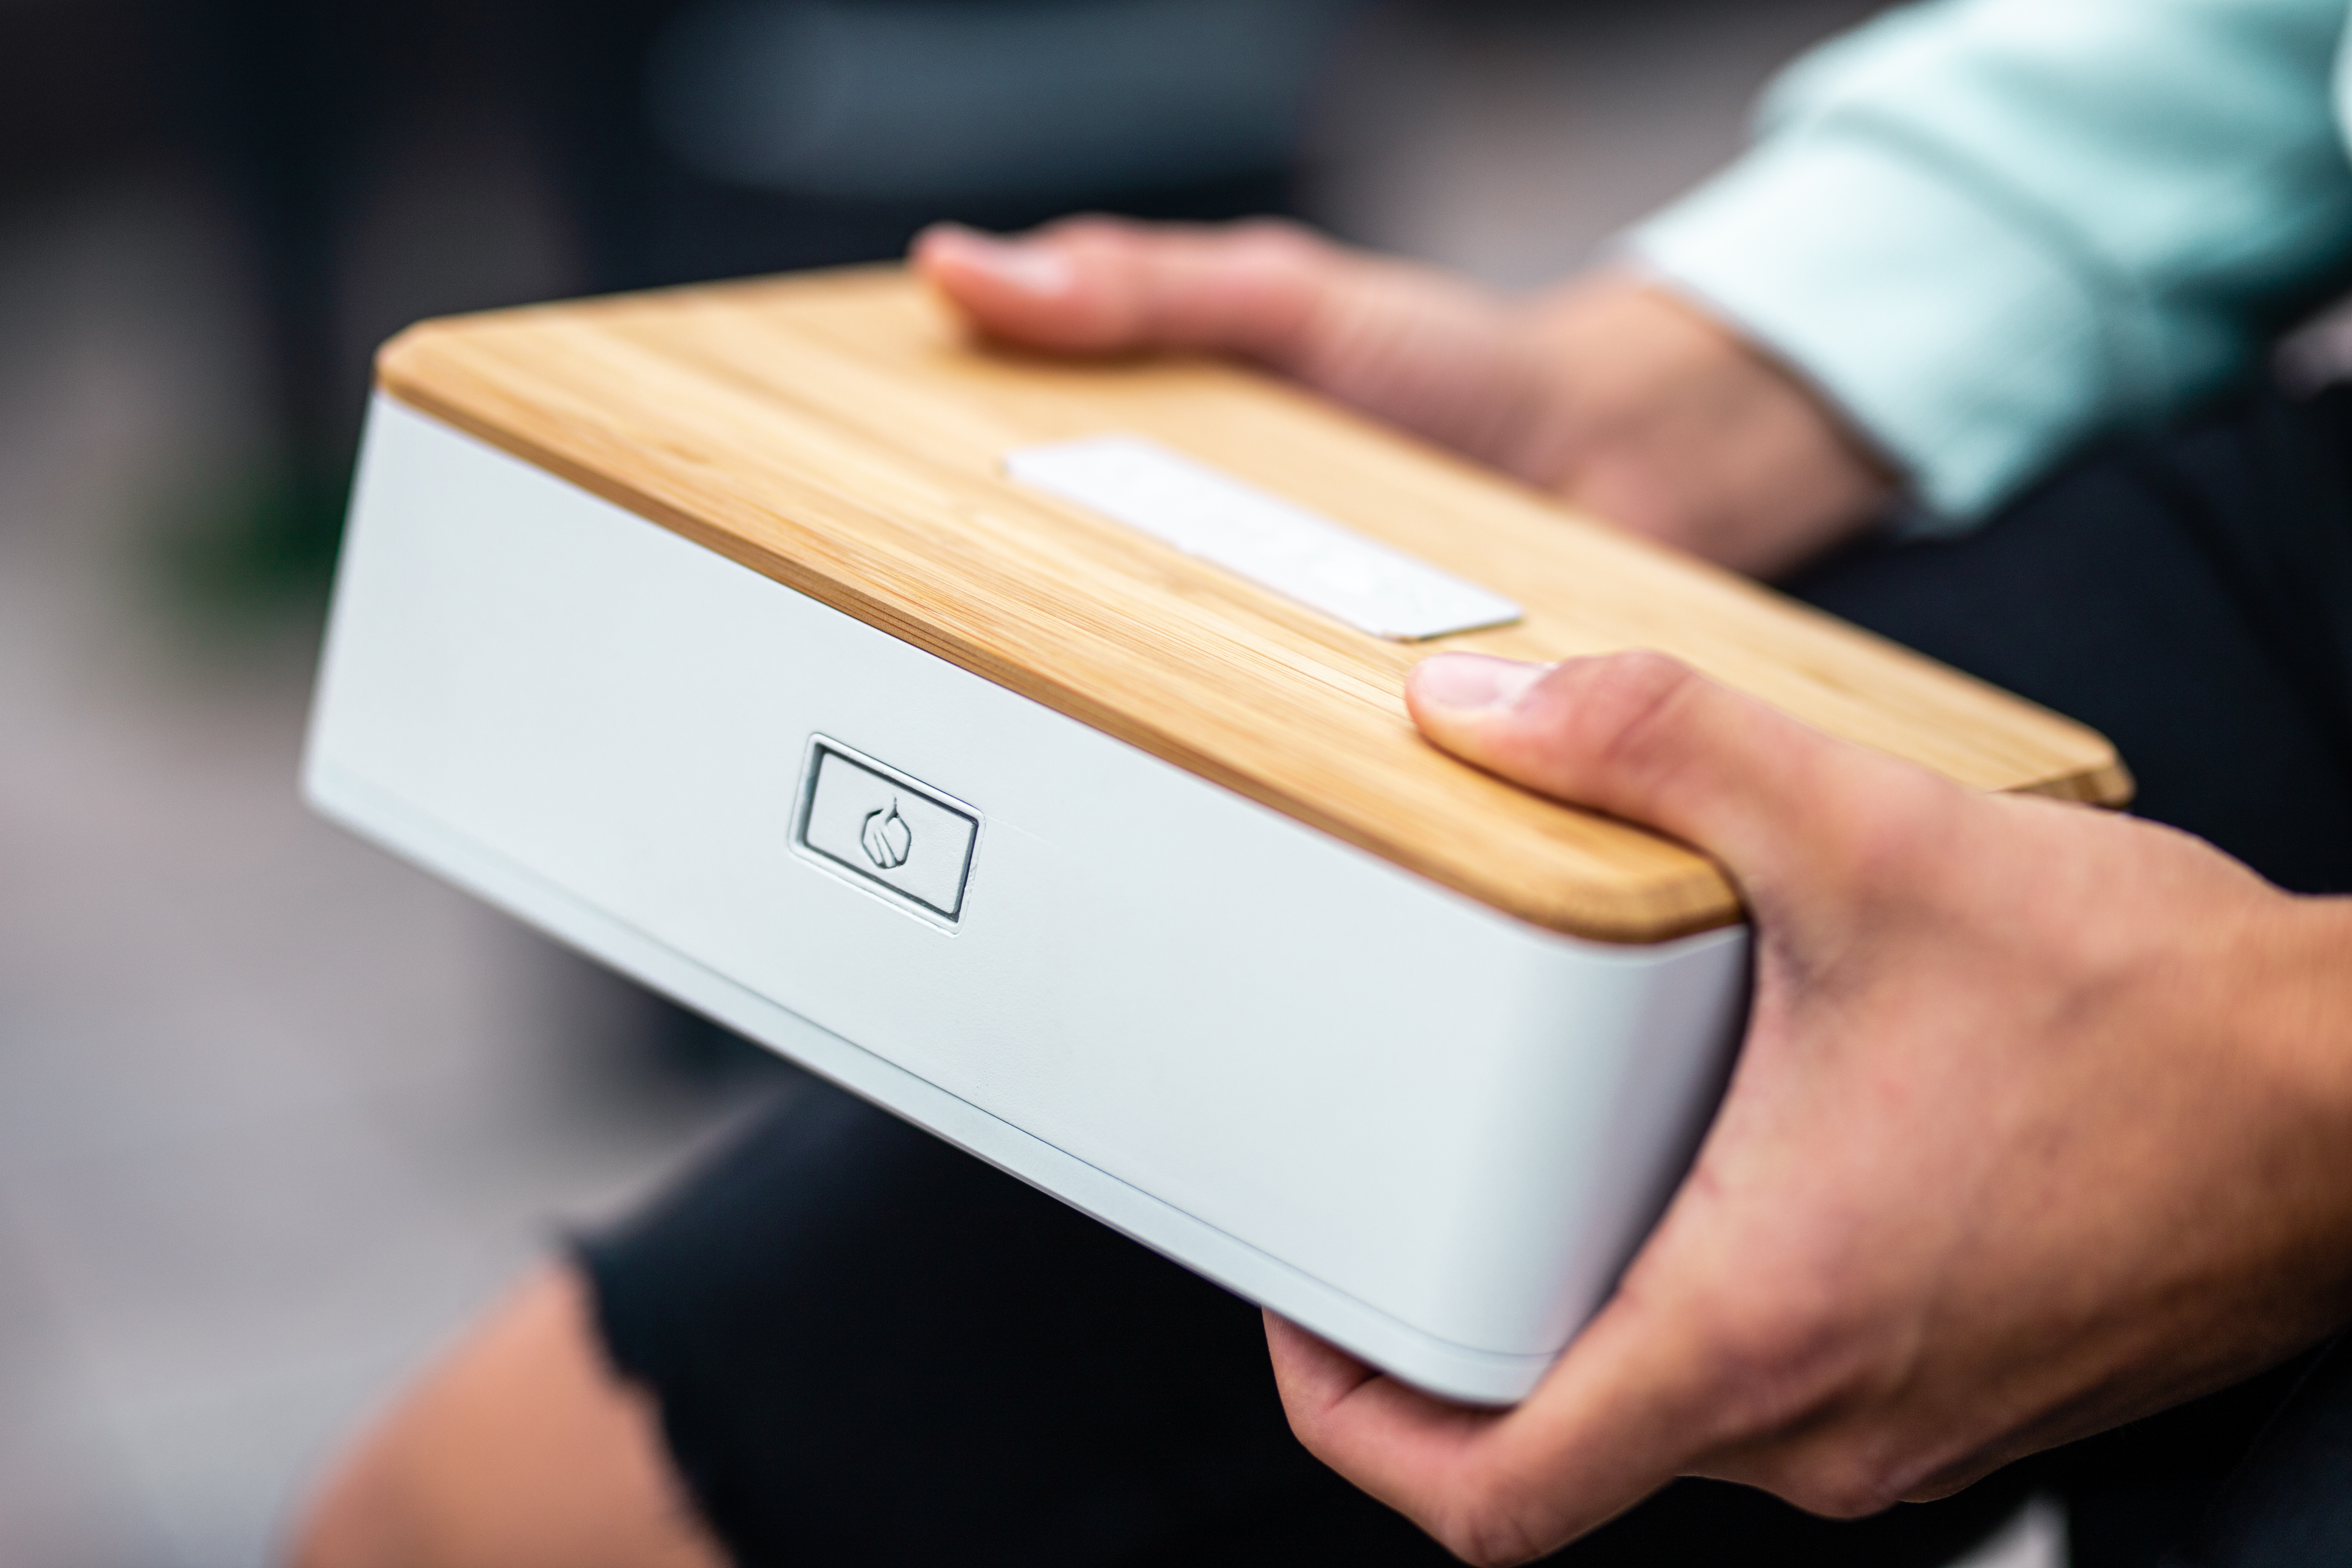 Introducing a New Lunchbox That Will Heat Your Food When You're